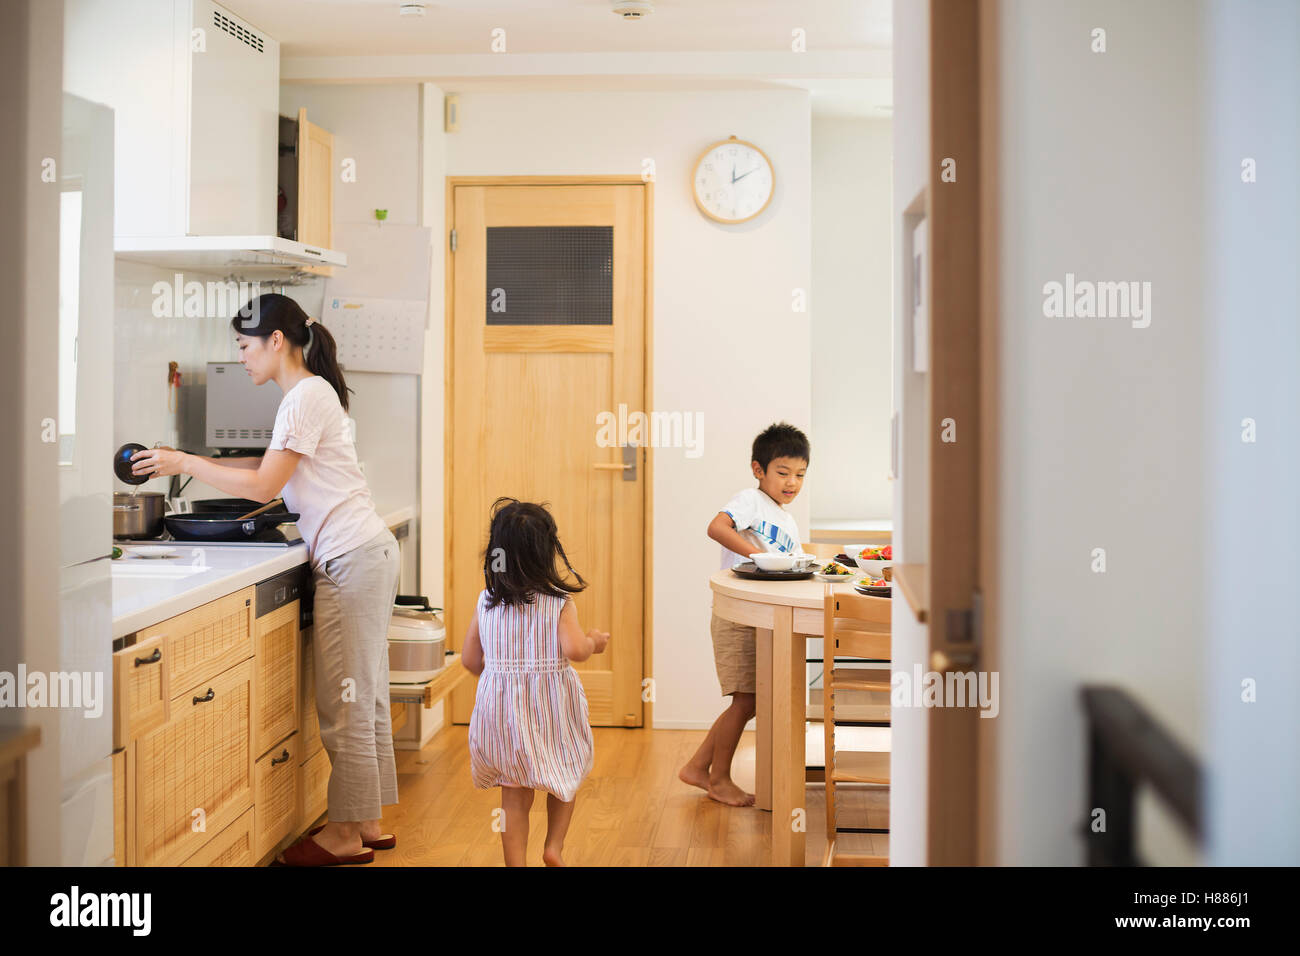 Family home. A woman and two children, a girl and a boy laying the table for a meal. Stock Photo